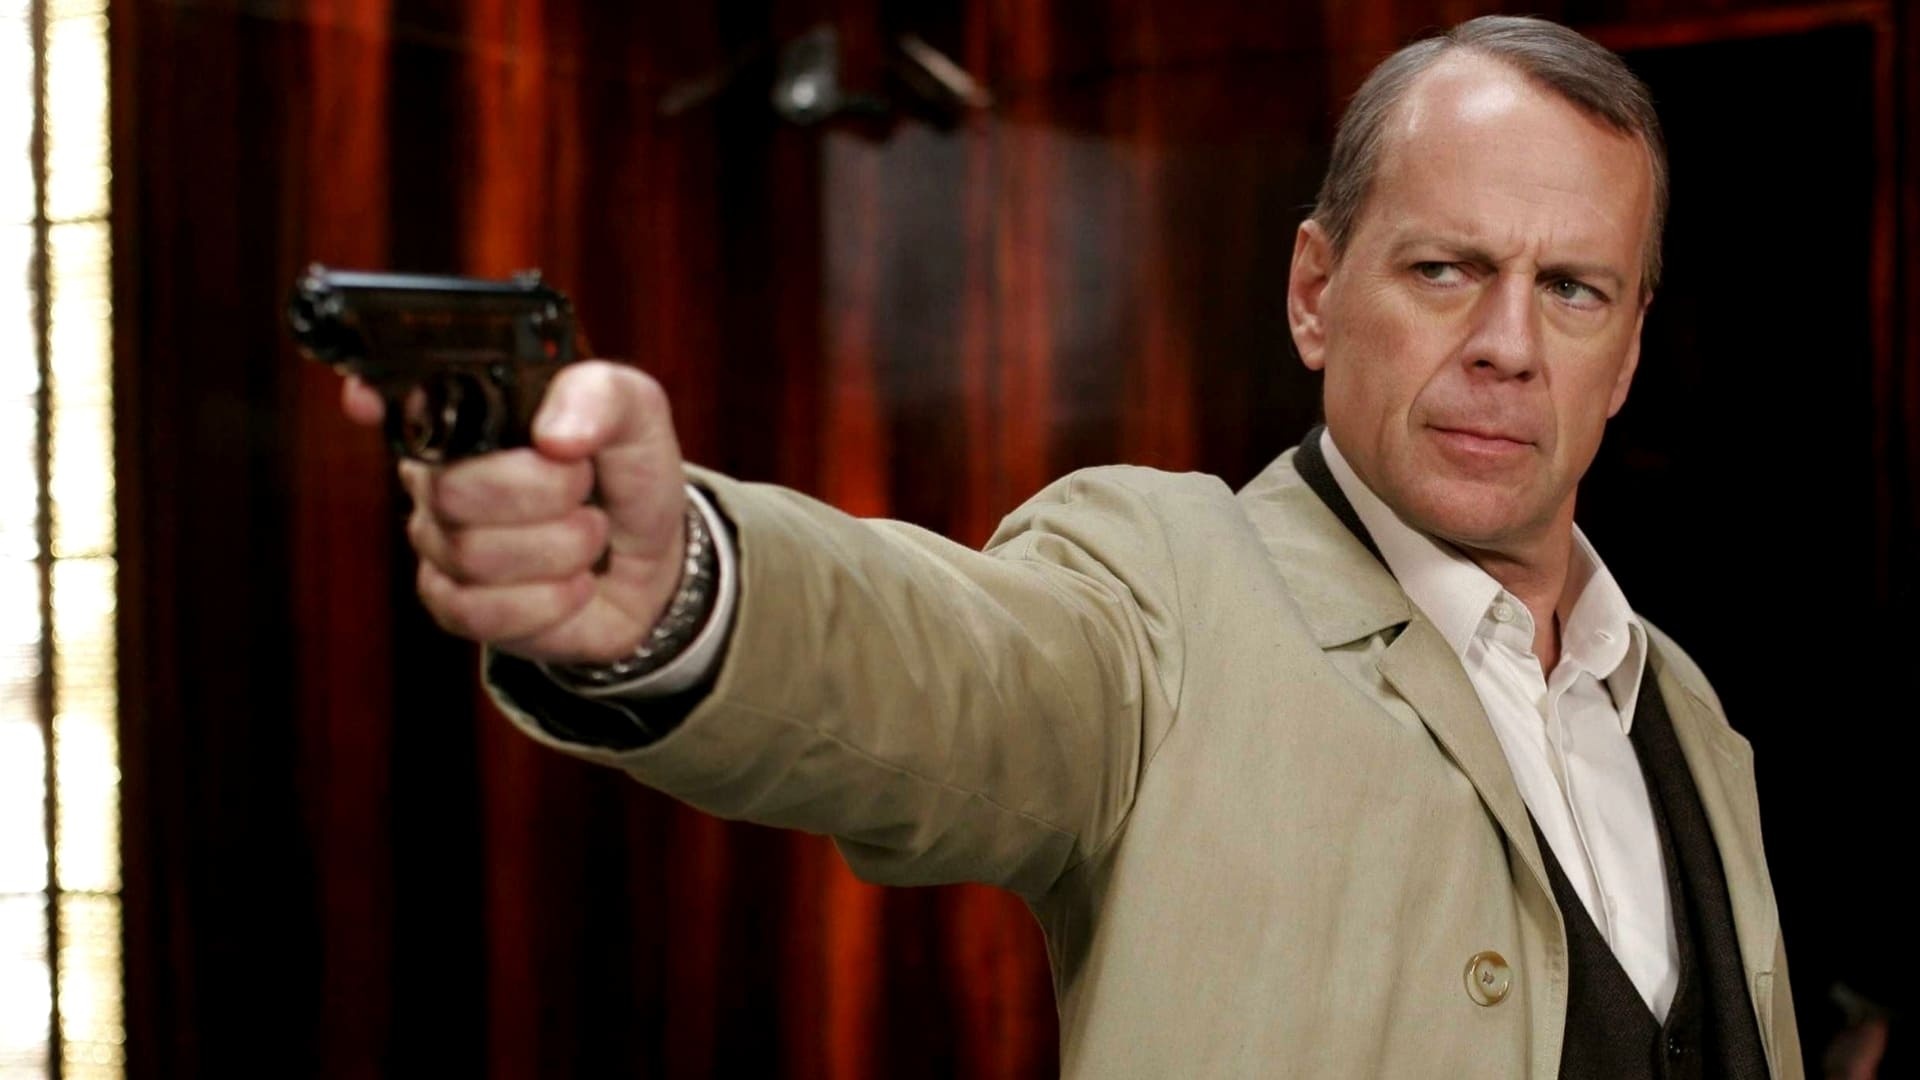 Lucky Number Slevin: Bruce Willis as Mr. Goodkat, Hit-man. 1920x1080 Full HD Background.